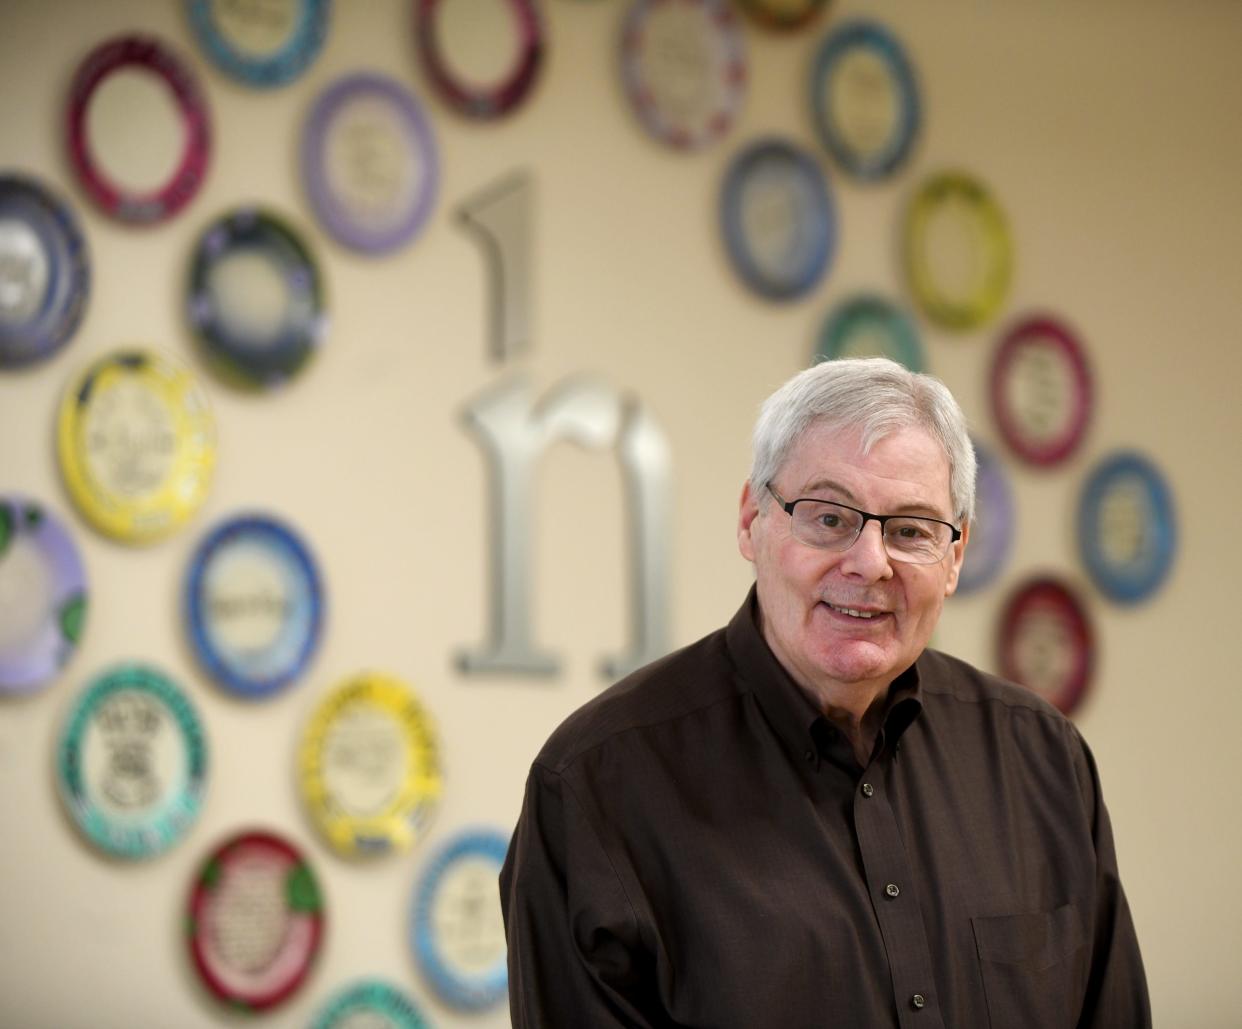 Refuge of Hope CEO Duane Wykoff will retire at the end of January. He joined the nonprofit in 2009.